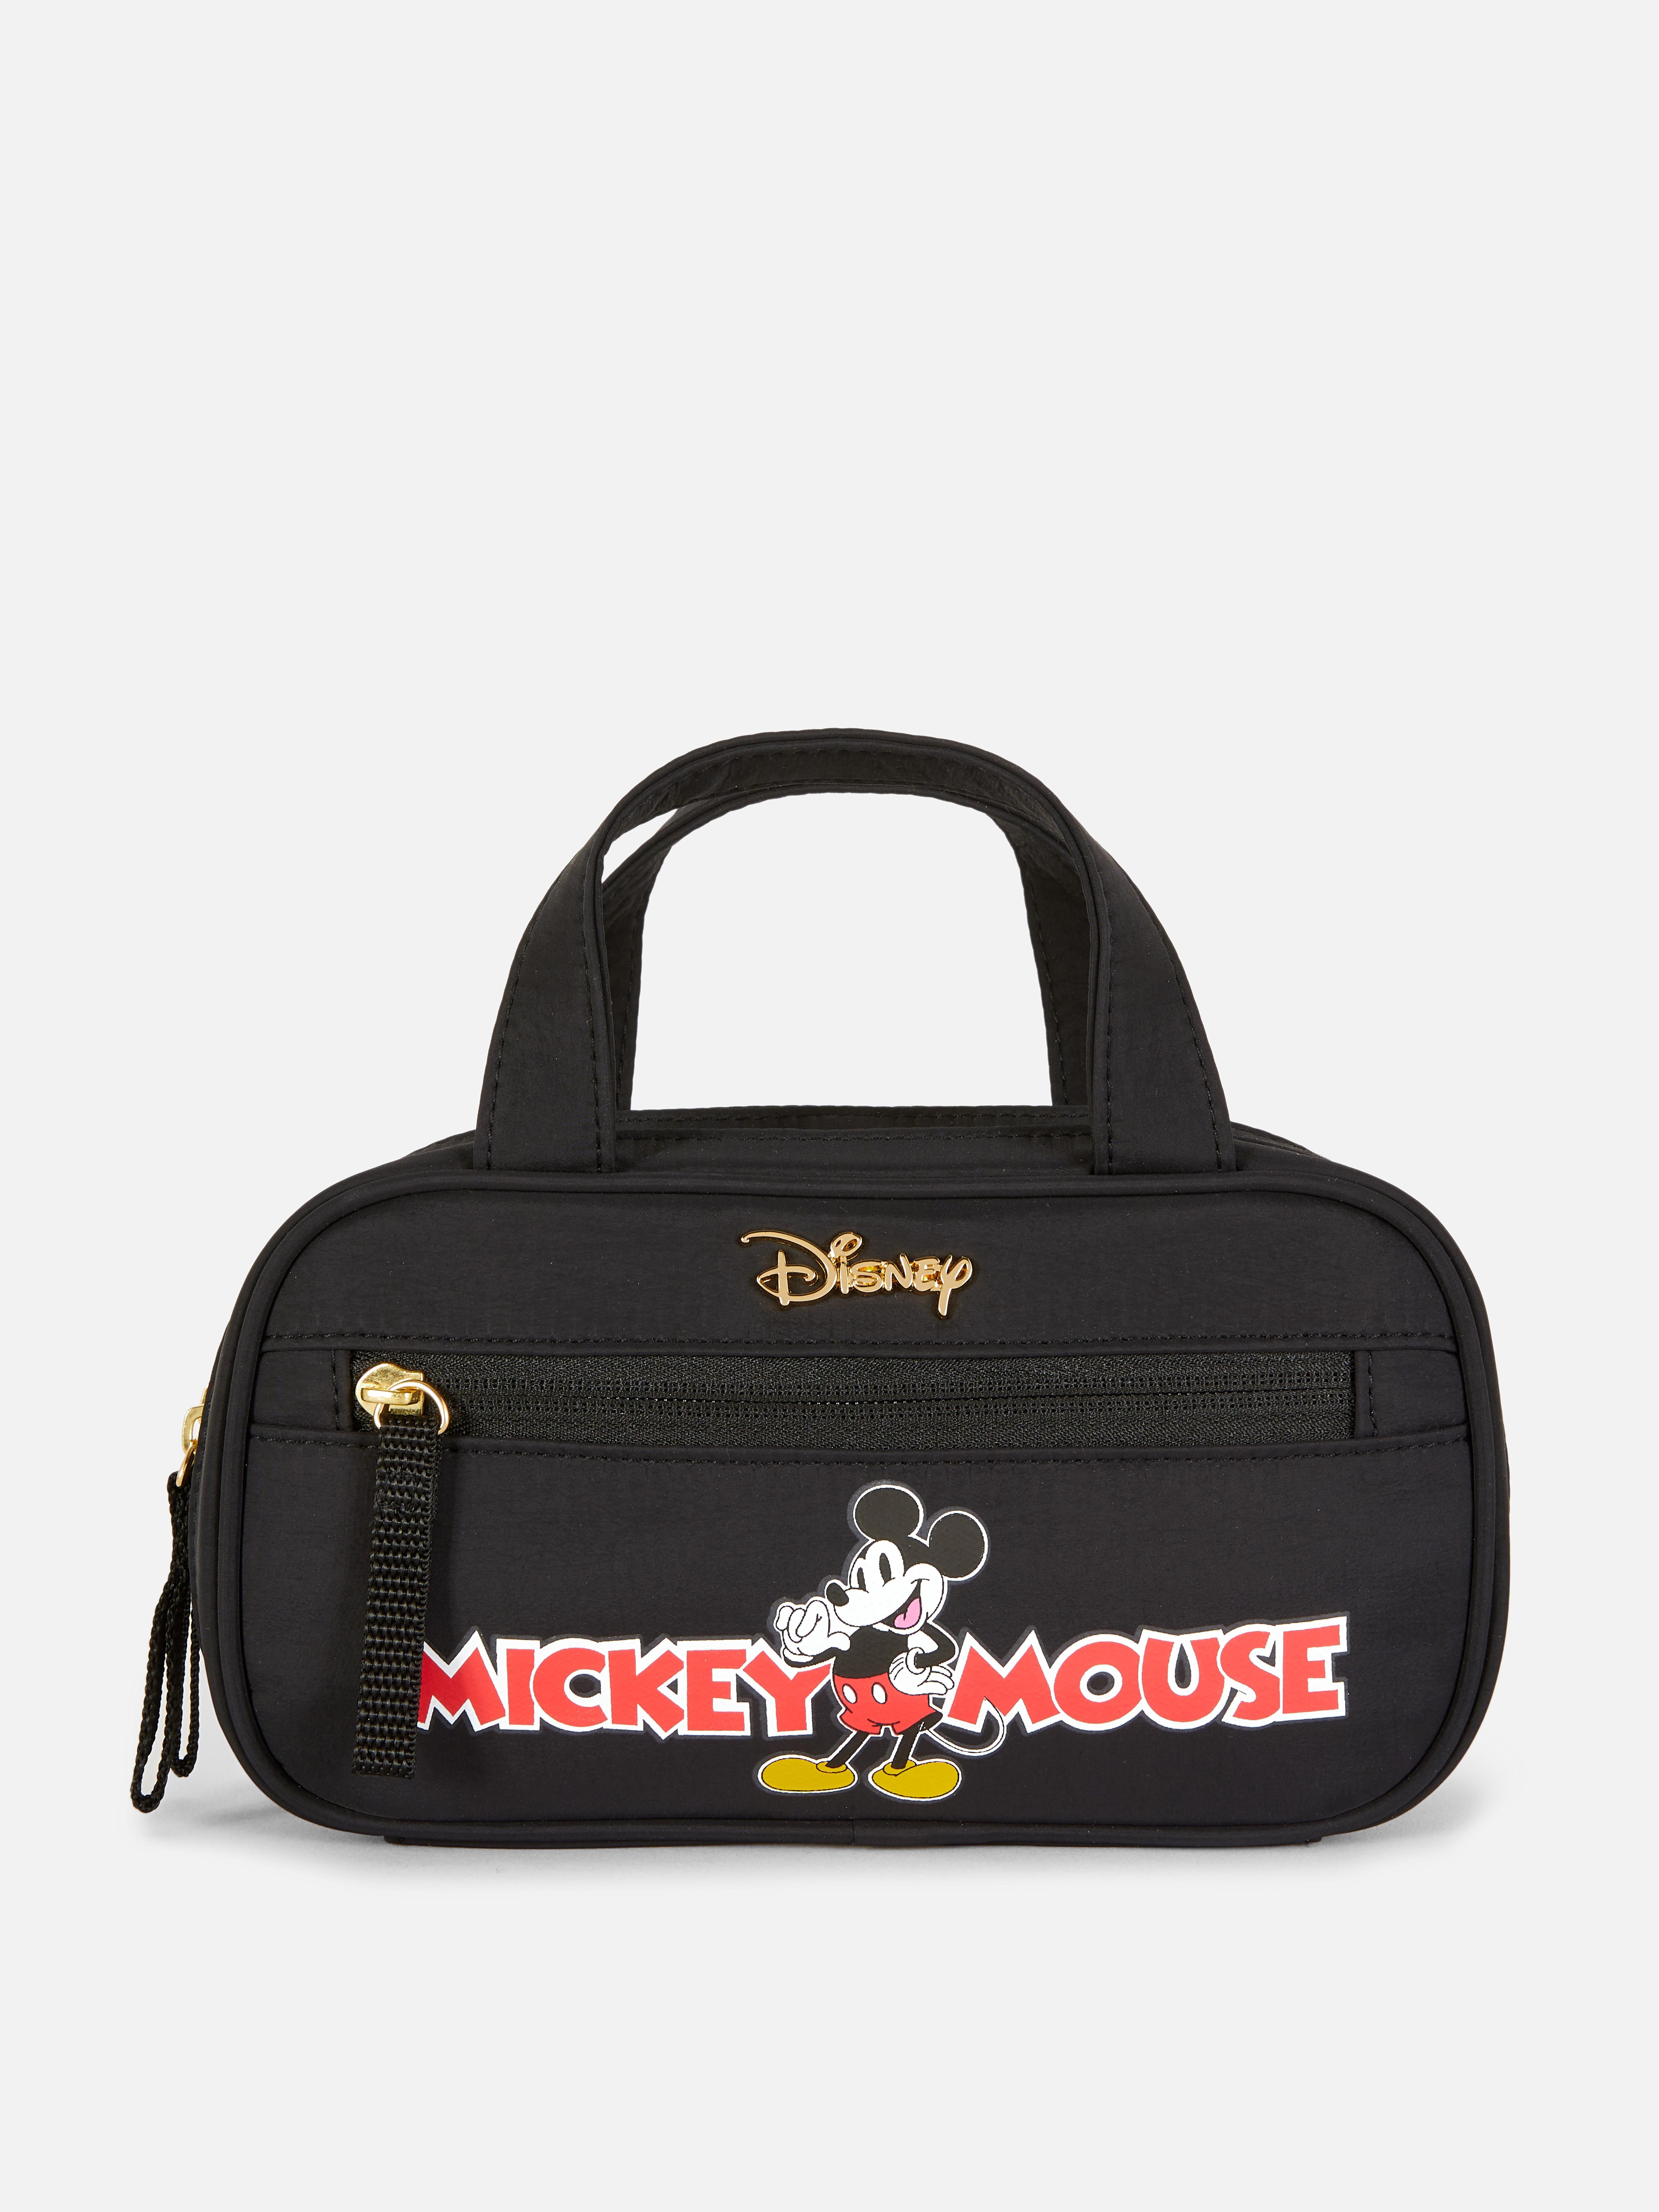 Disney’s Mickey Mouse Travel Wash Bag